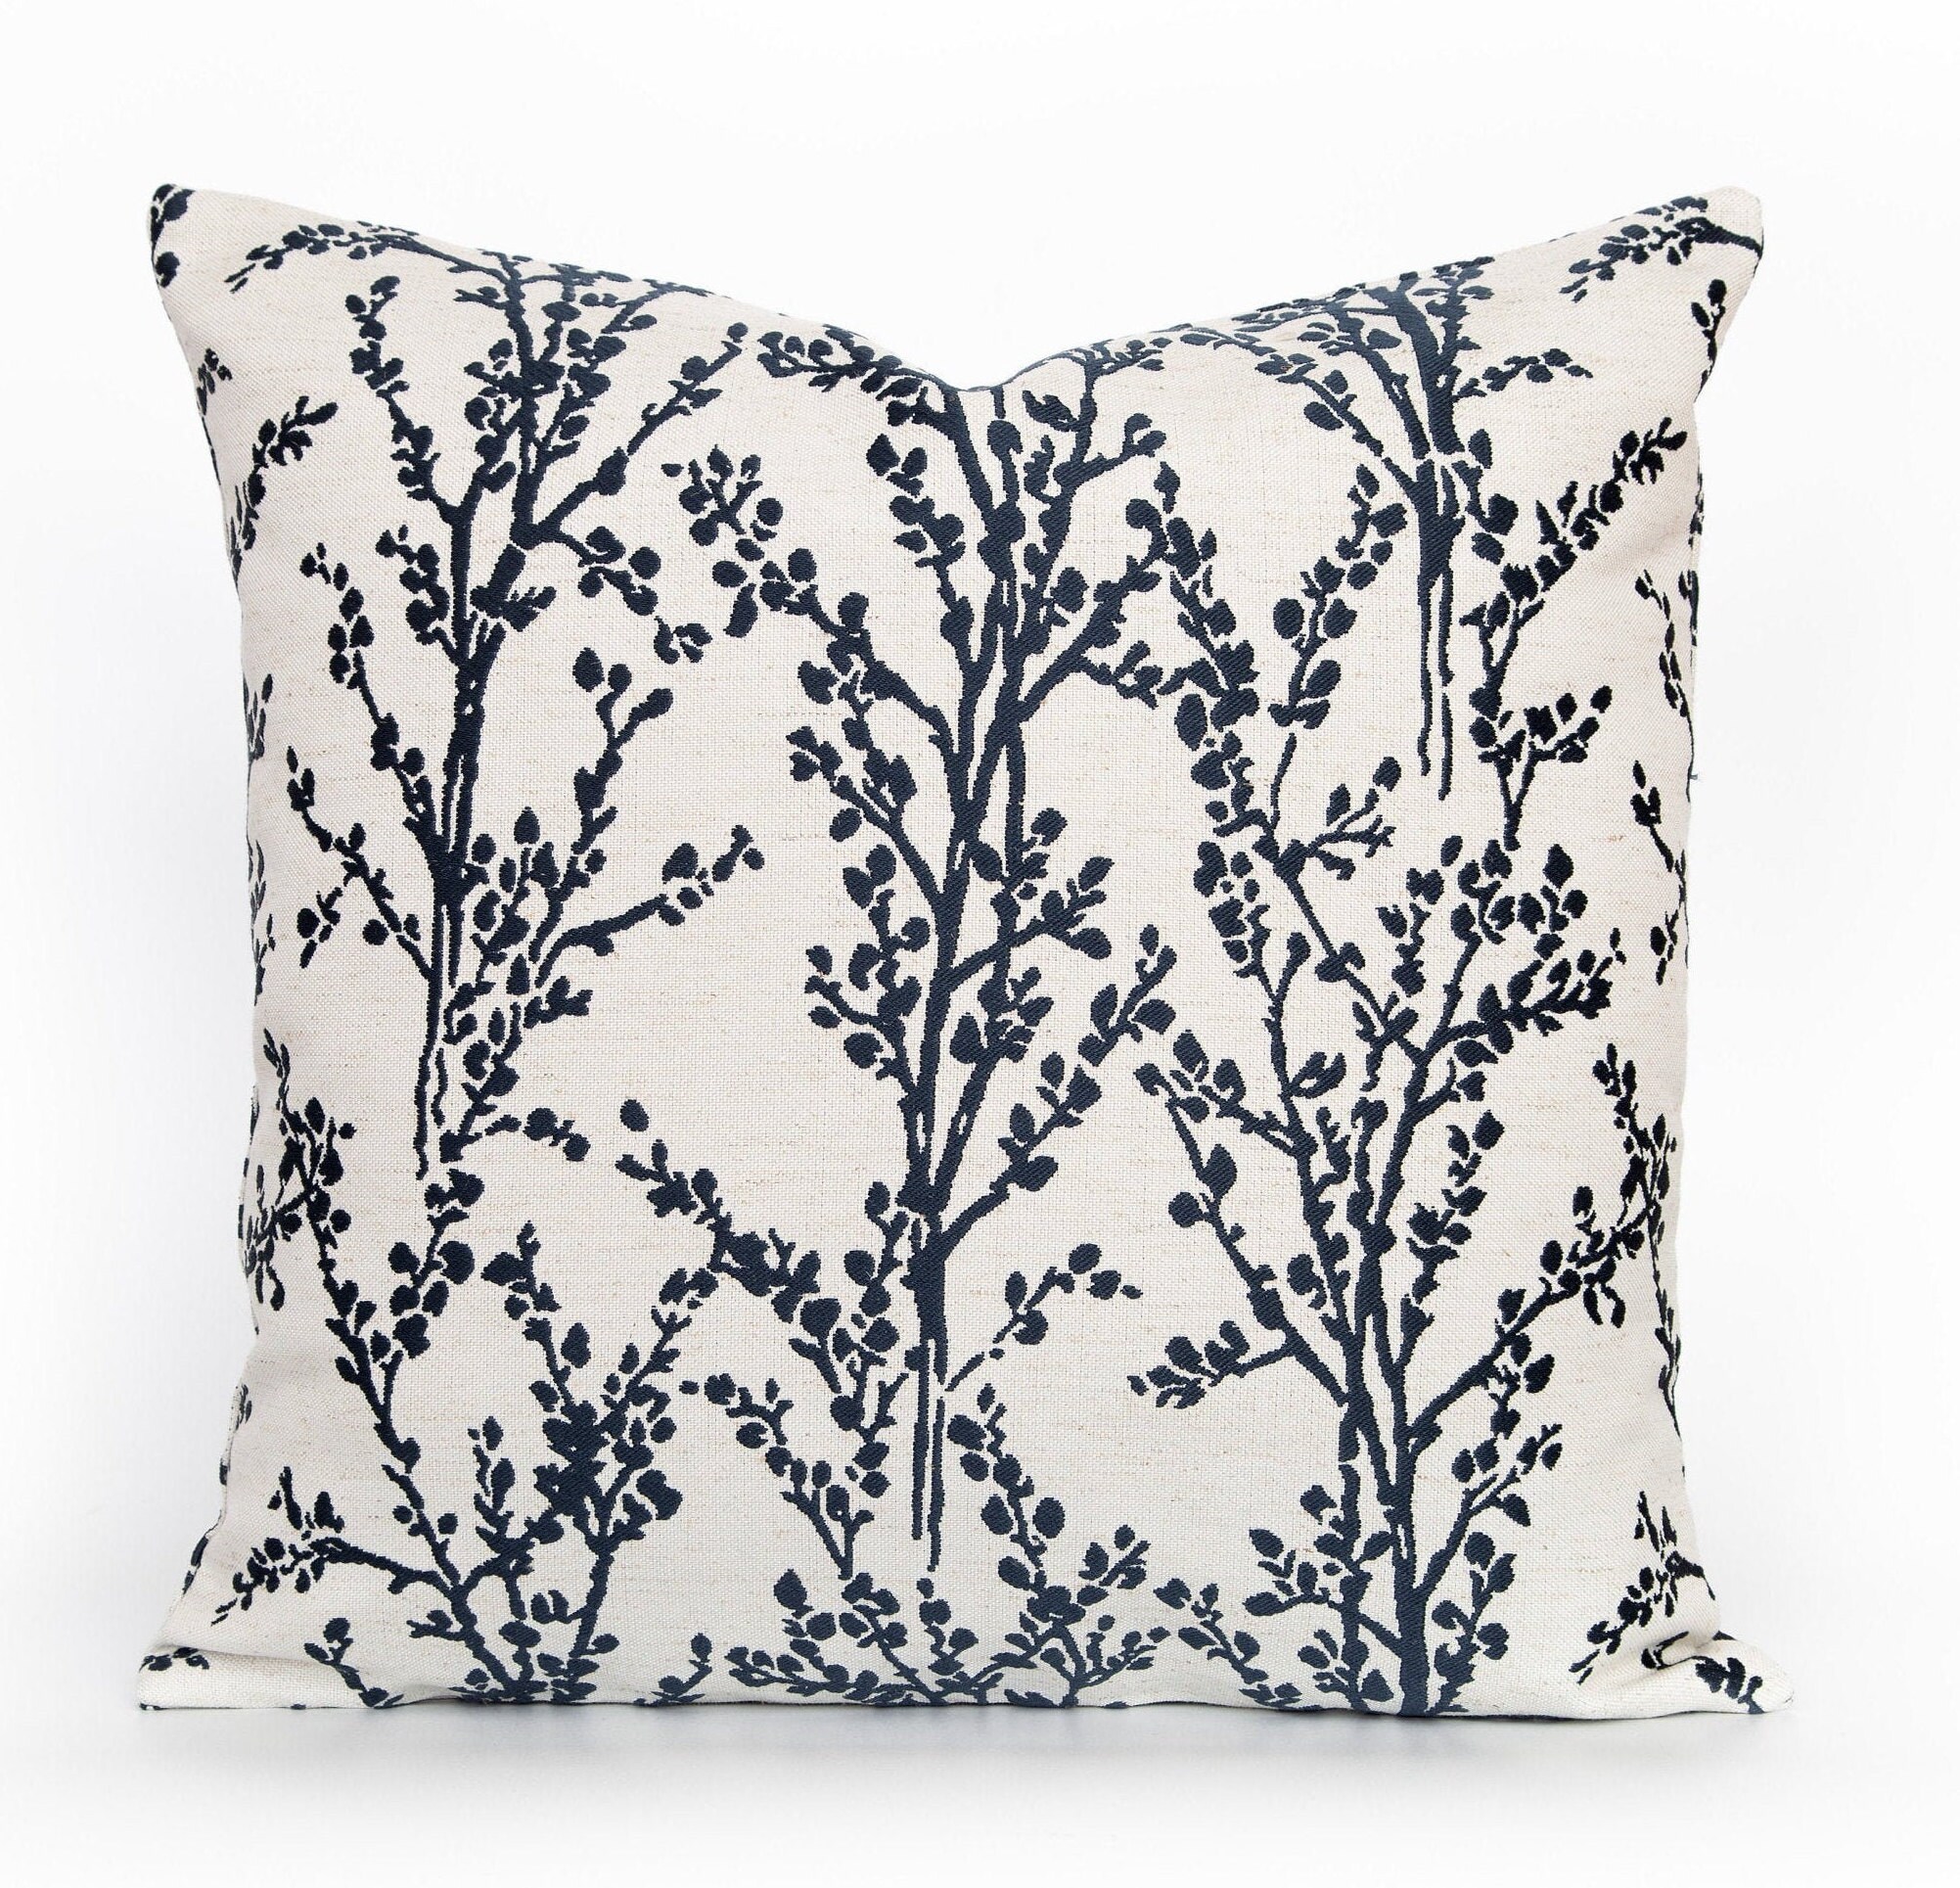 Woven Floral Stems Decorative Pillow Cover. Accent Throw - Etsy